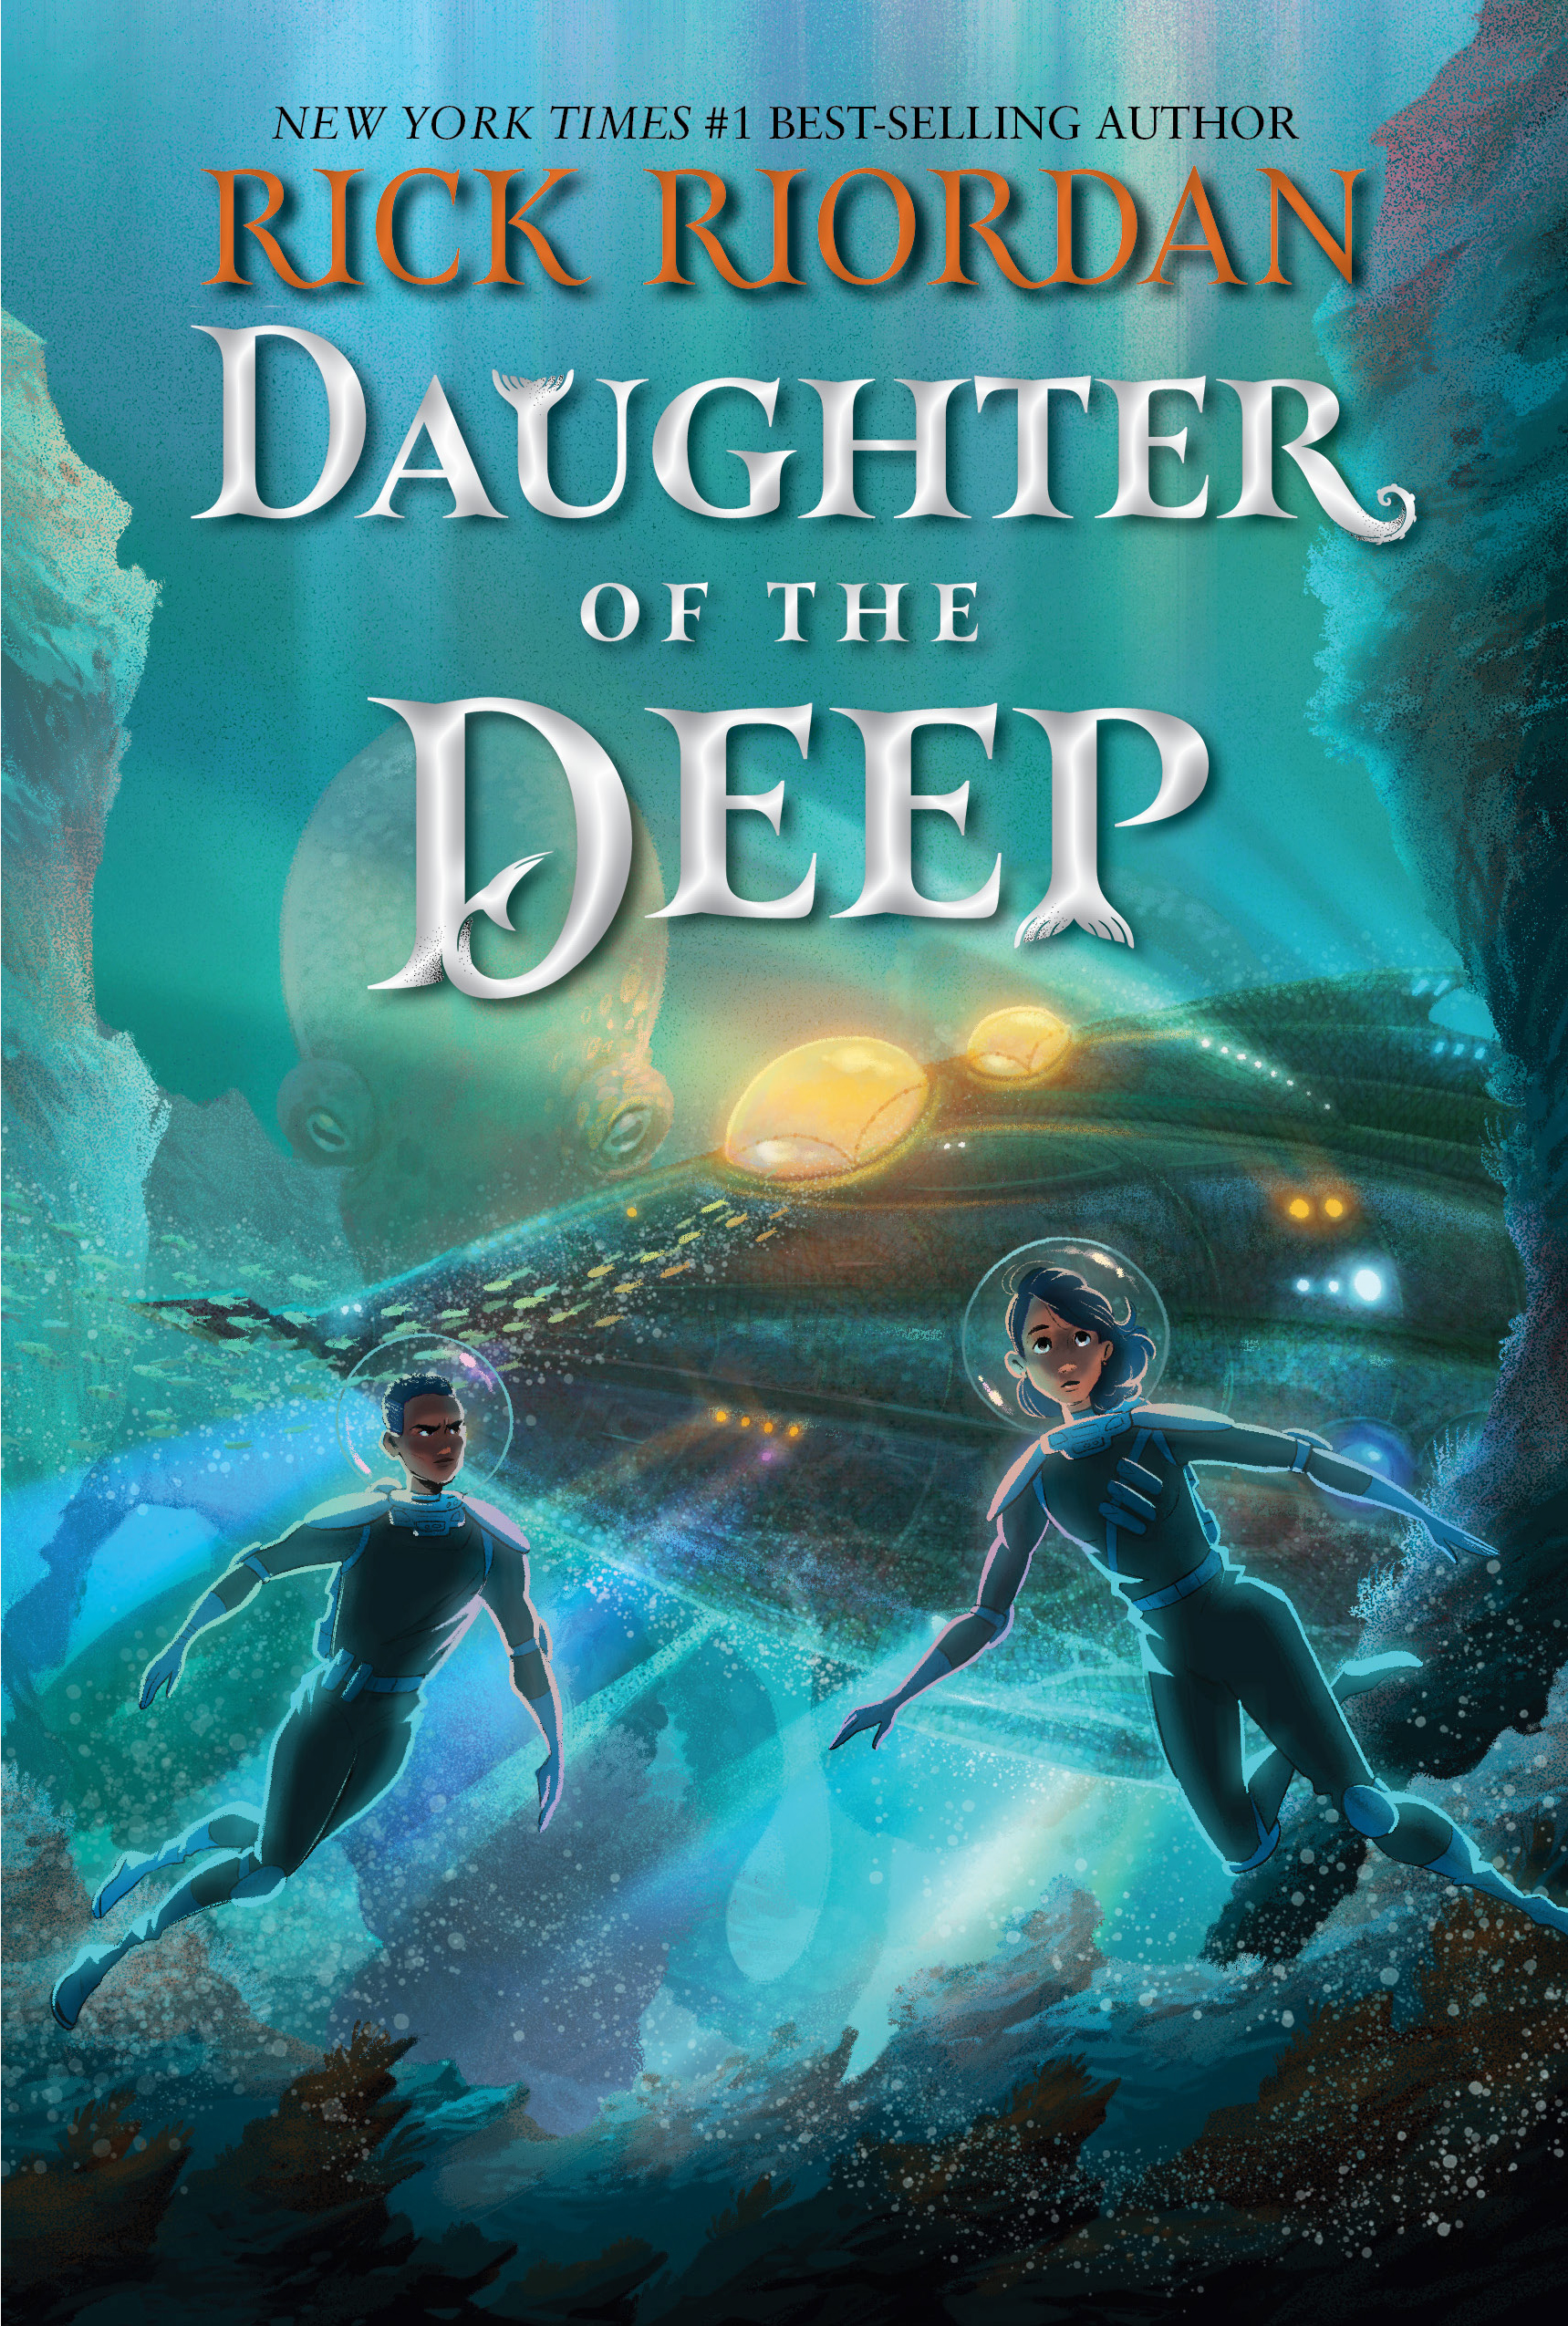 Virtual event with Rick Riordan/Daughters of the Deep